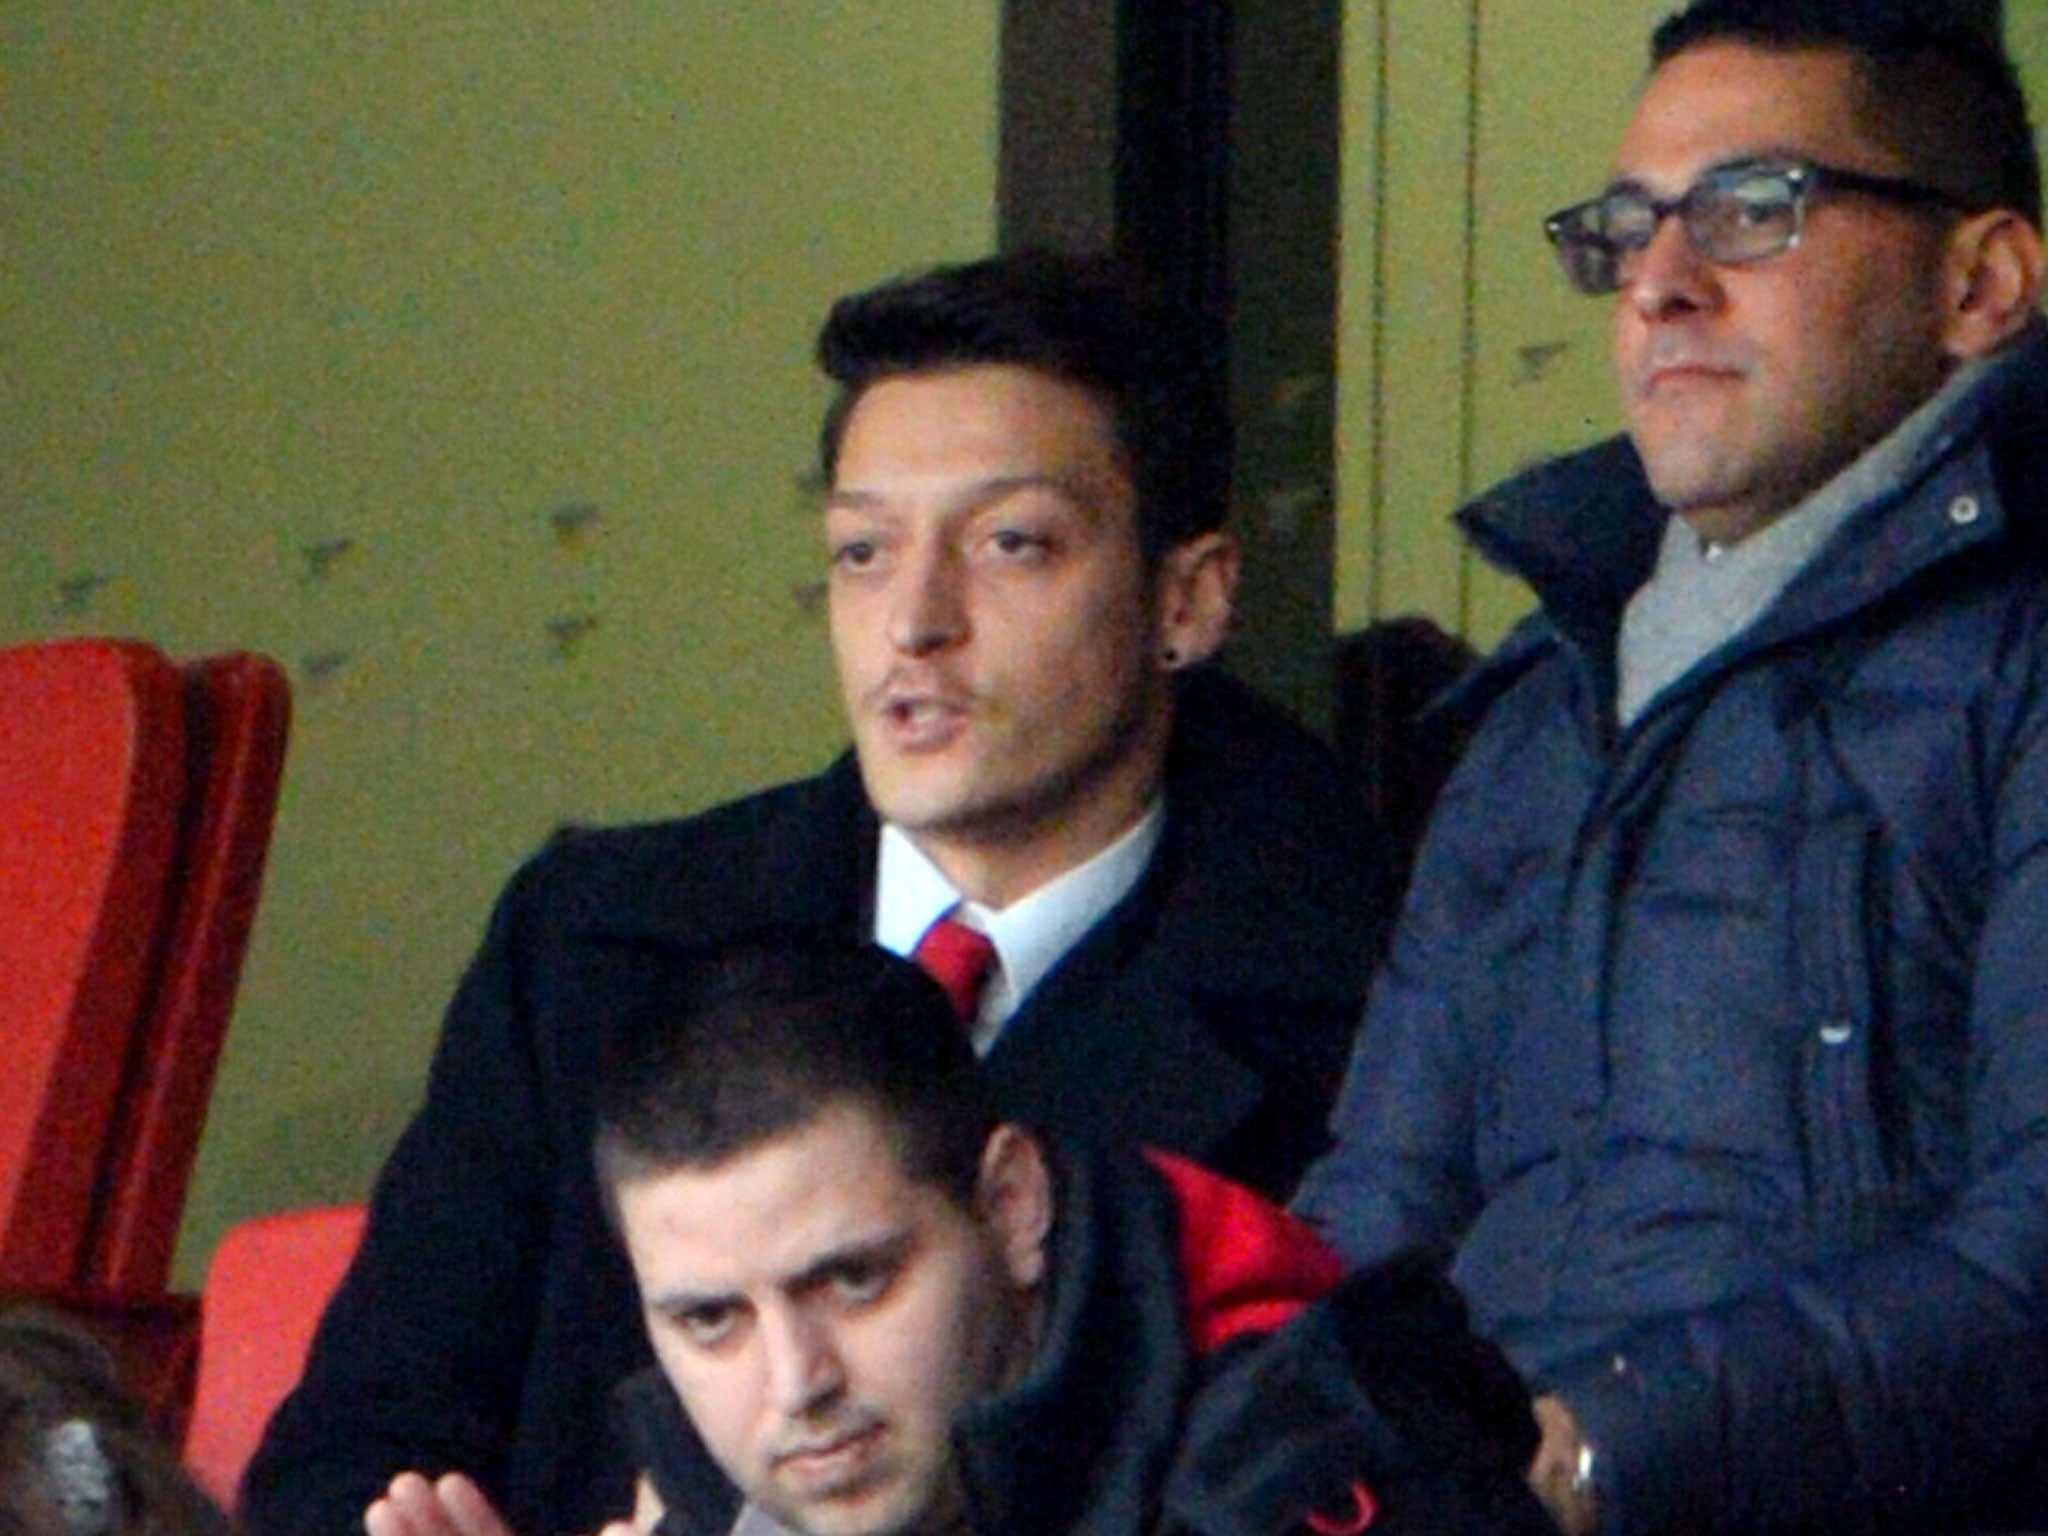 Mesut Ozil (centre) watches Arsenal beat Sunderland 4-1 from the stands at the Emirates Stadium